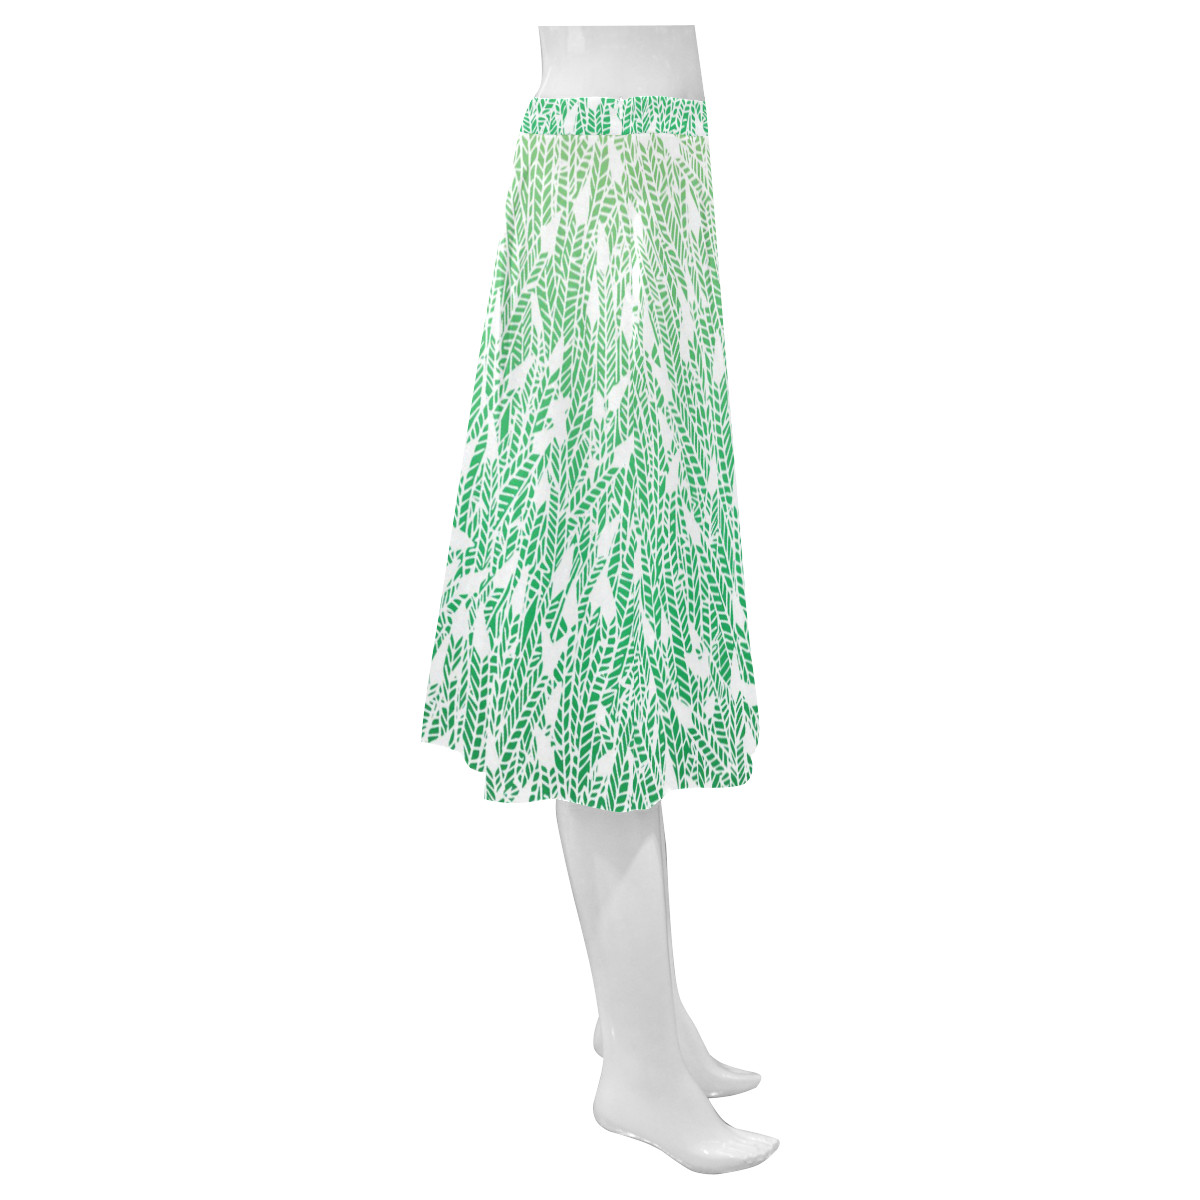 green ombre feathers pattern white Mnemosyne Women's Crepe Skirt (Model D16)